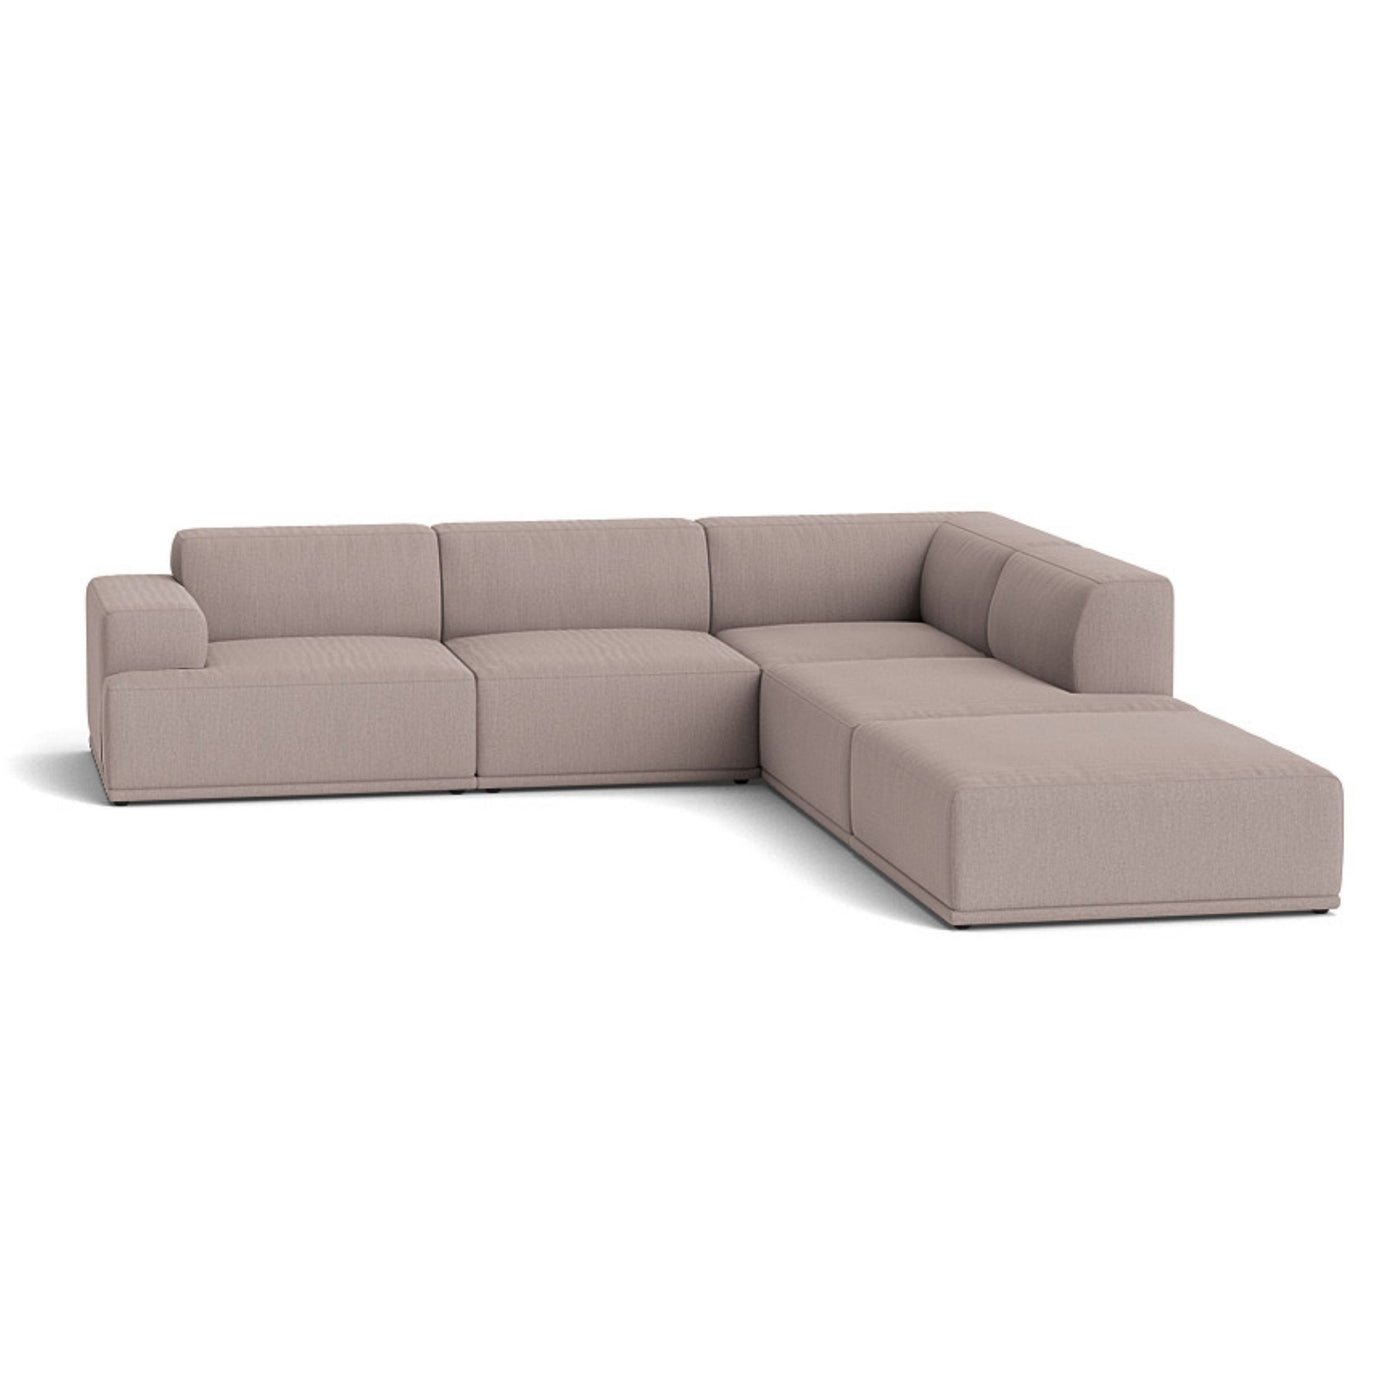 Muuto Connect Soft Modular Corner Sofa, configuration 2. Made-to-order from someday designs. #colour_re-wool-628